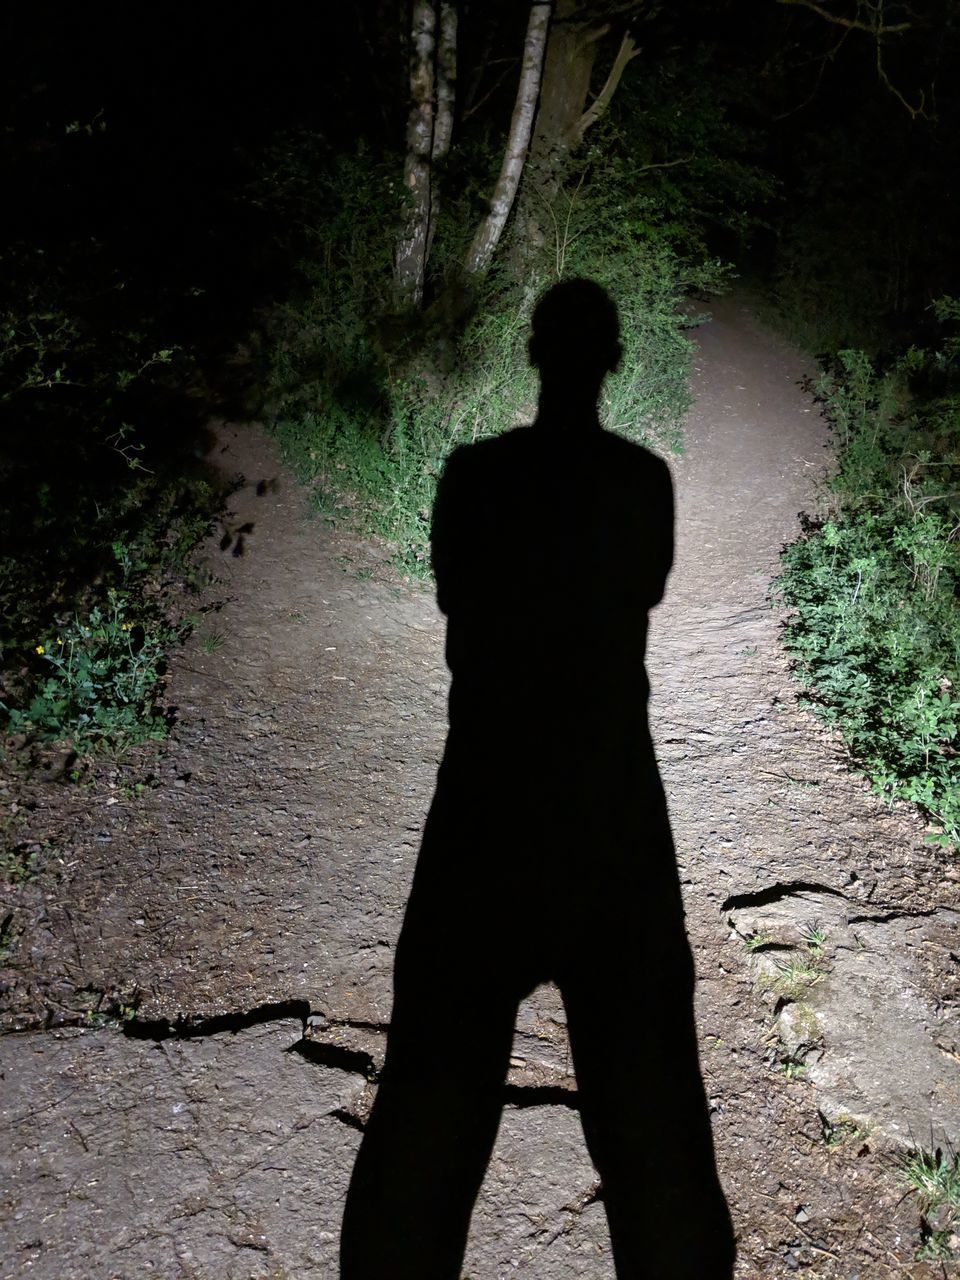 SILHOUETTE MAN STANDING ON FOOTPATH IN FOREST